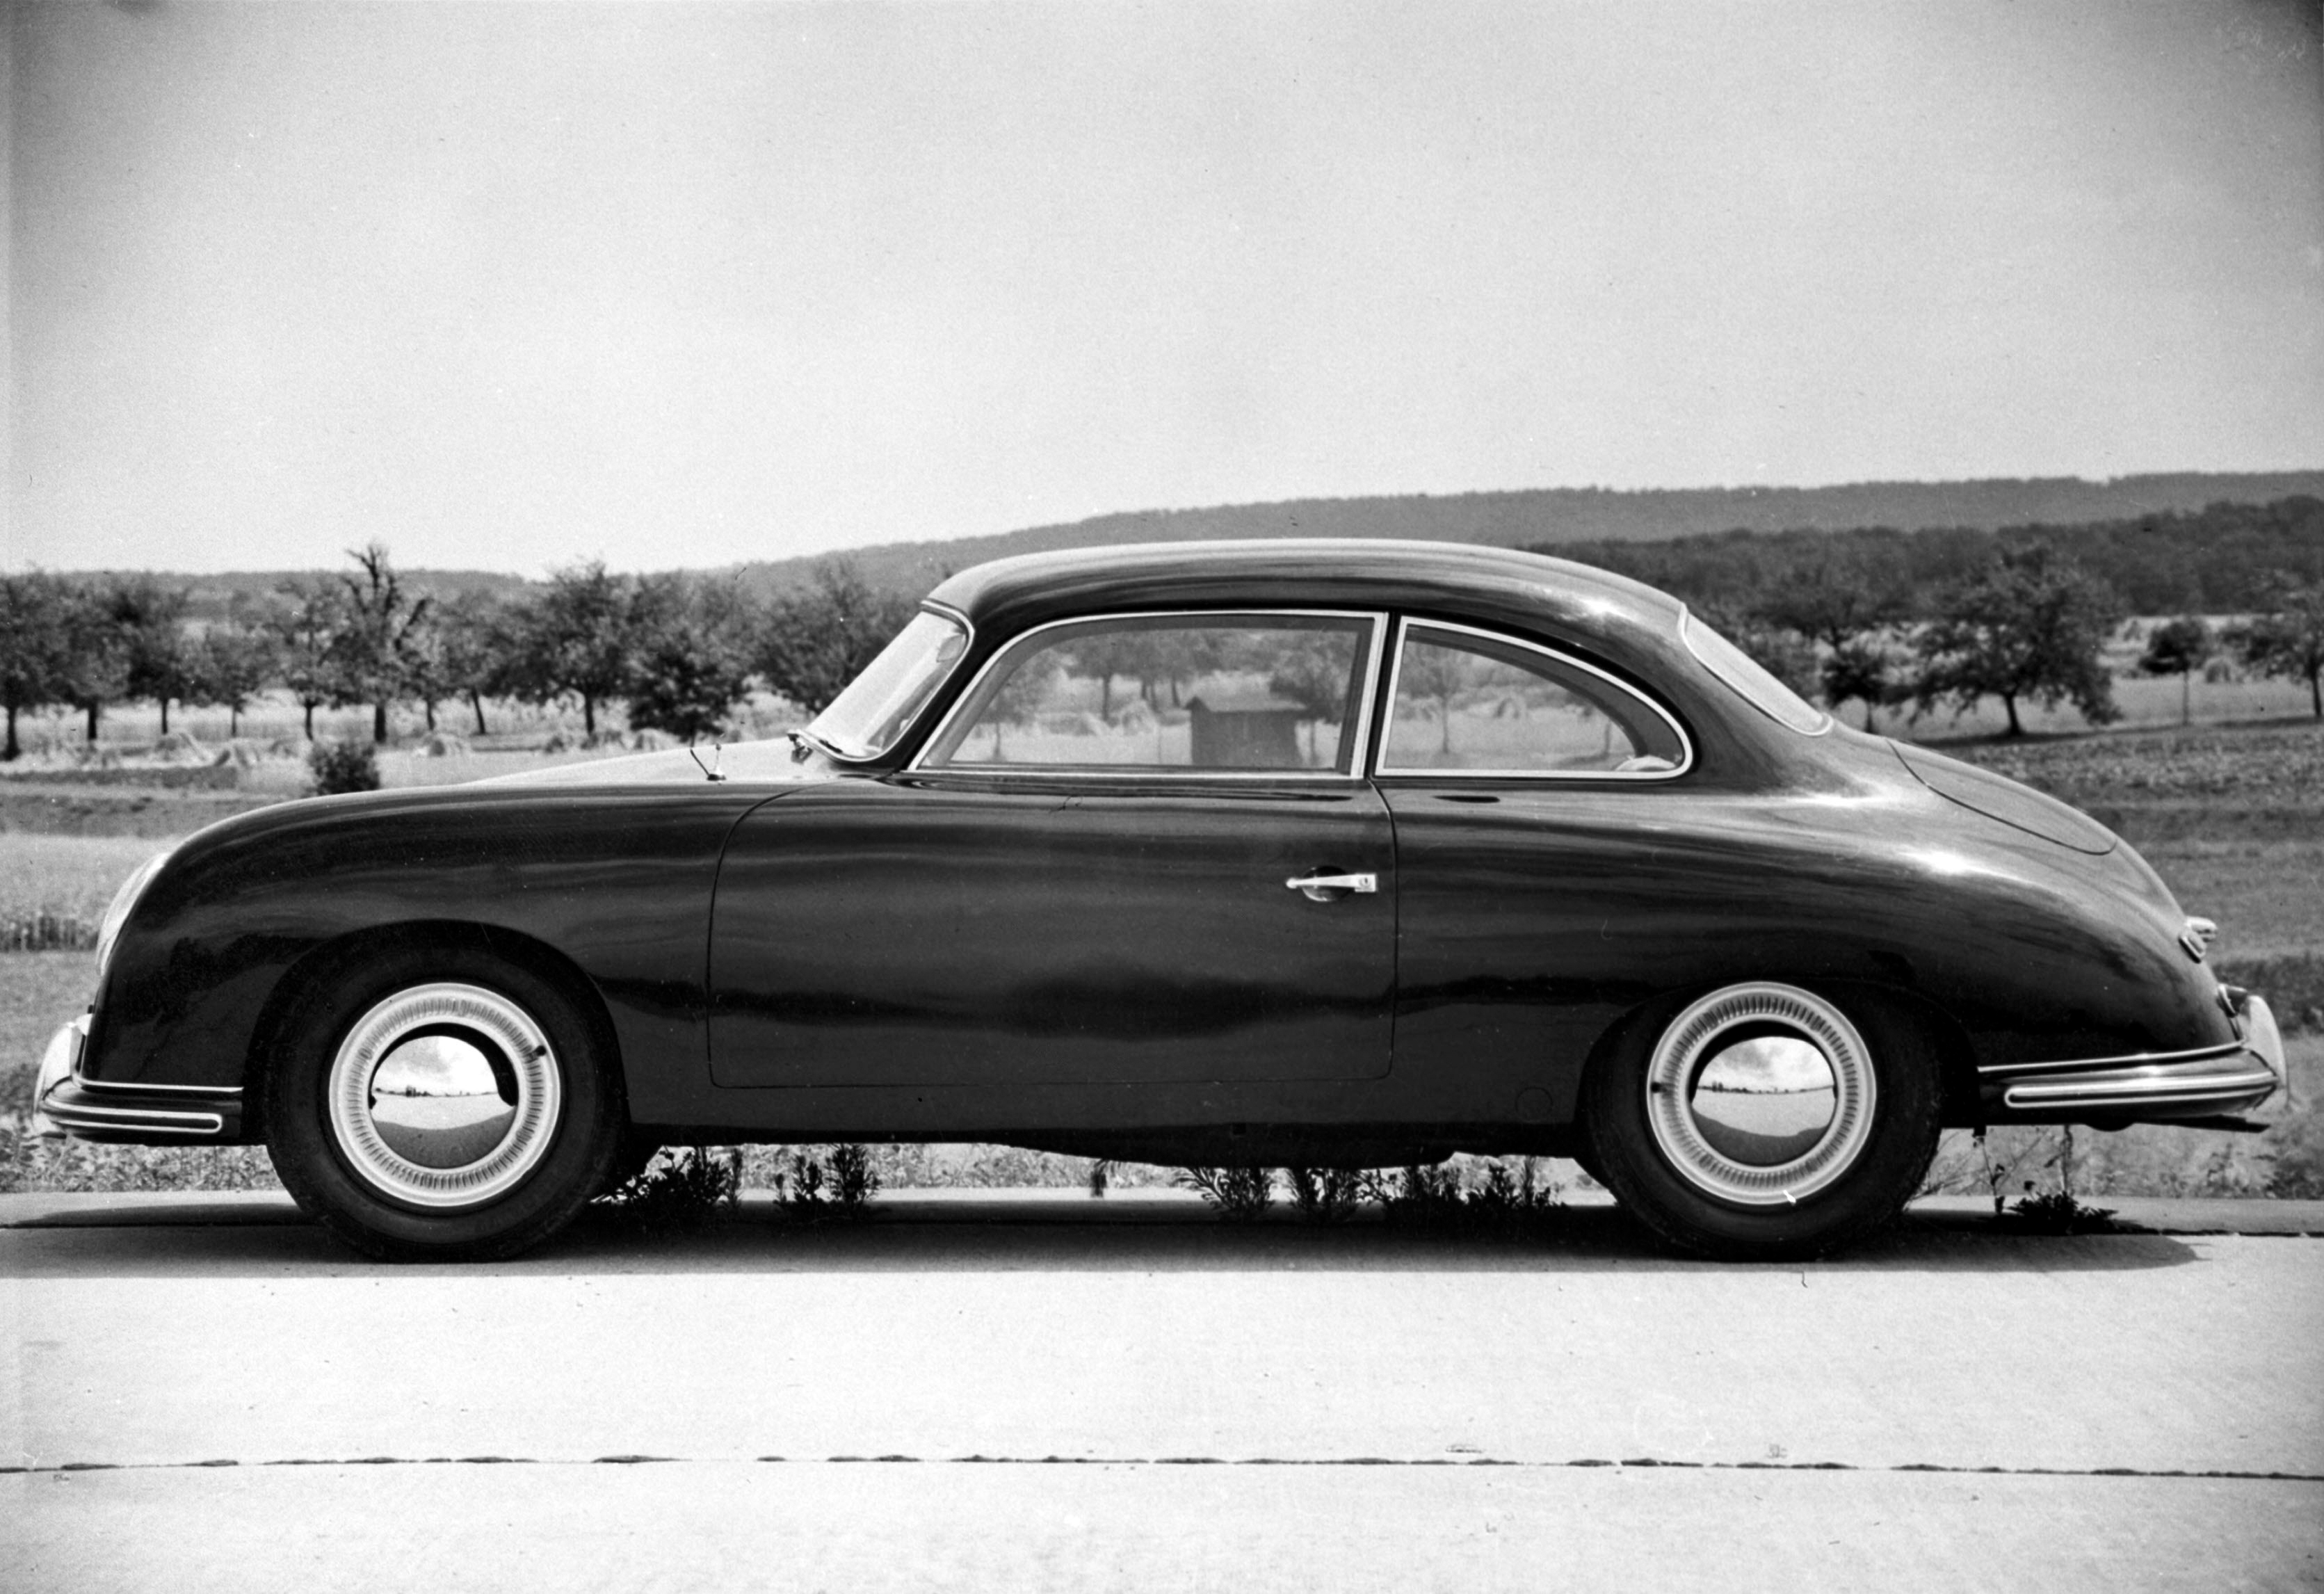 Was this the new Porsche or the next one? Erwin Komenda’s 1952 proposal for the Typ 530 started the conversations, discussions, and disagreements that led to the Typ 901 a decade later. Porsche Archiv